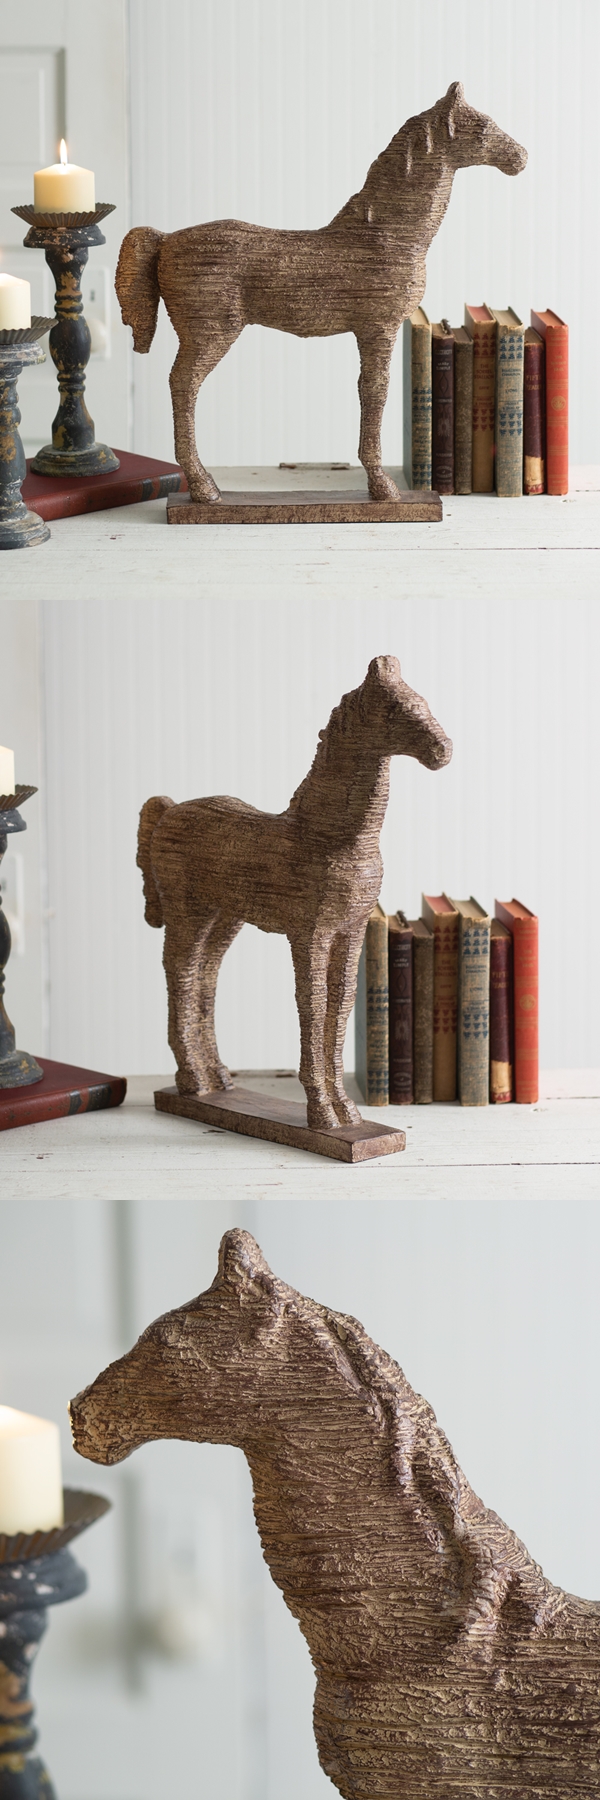 CTW Home Collection Chiseled-Wood-Look Standing Horse Statue